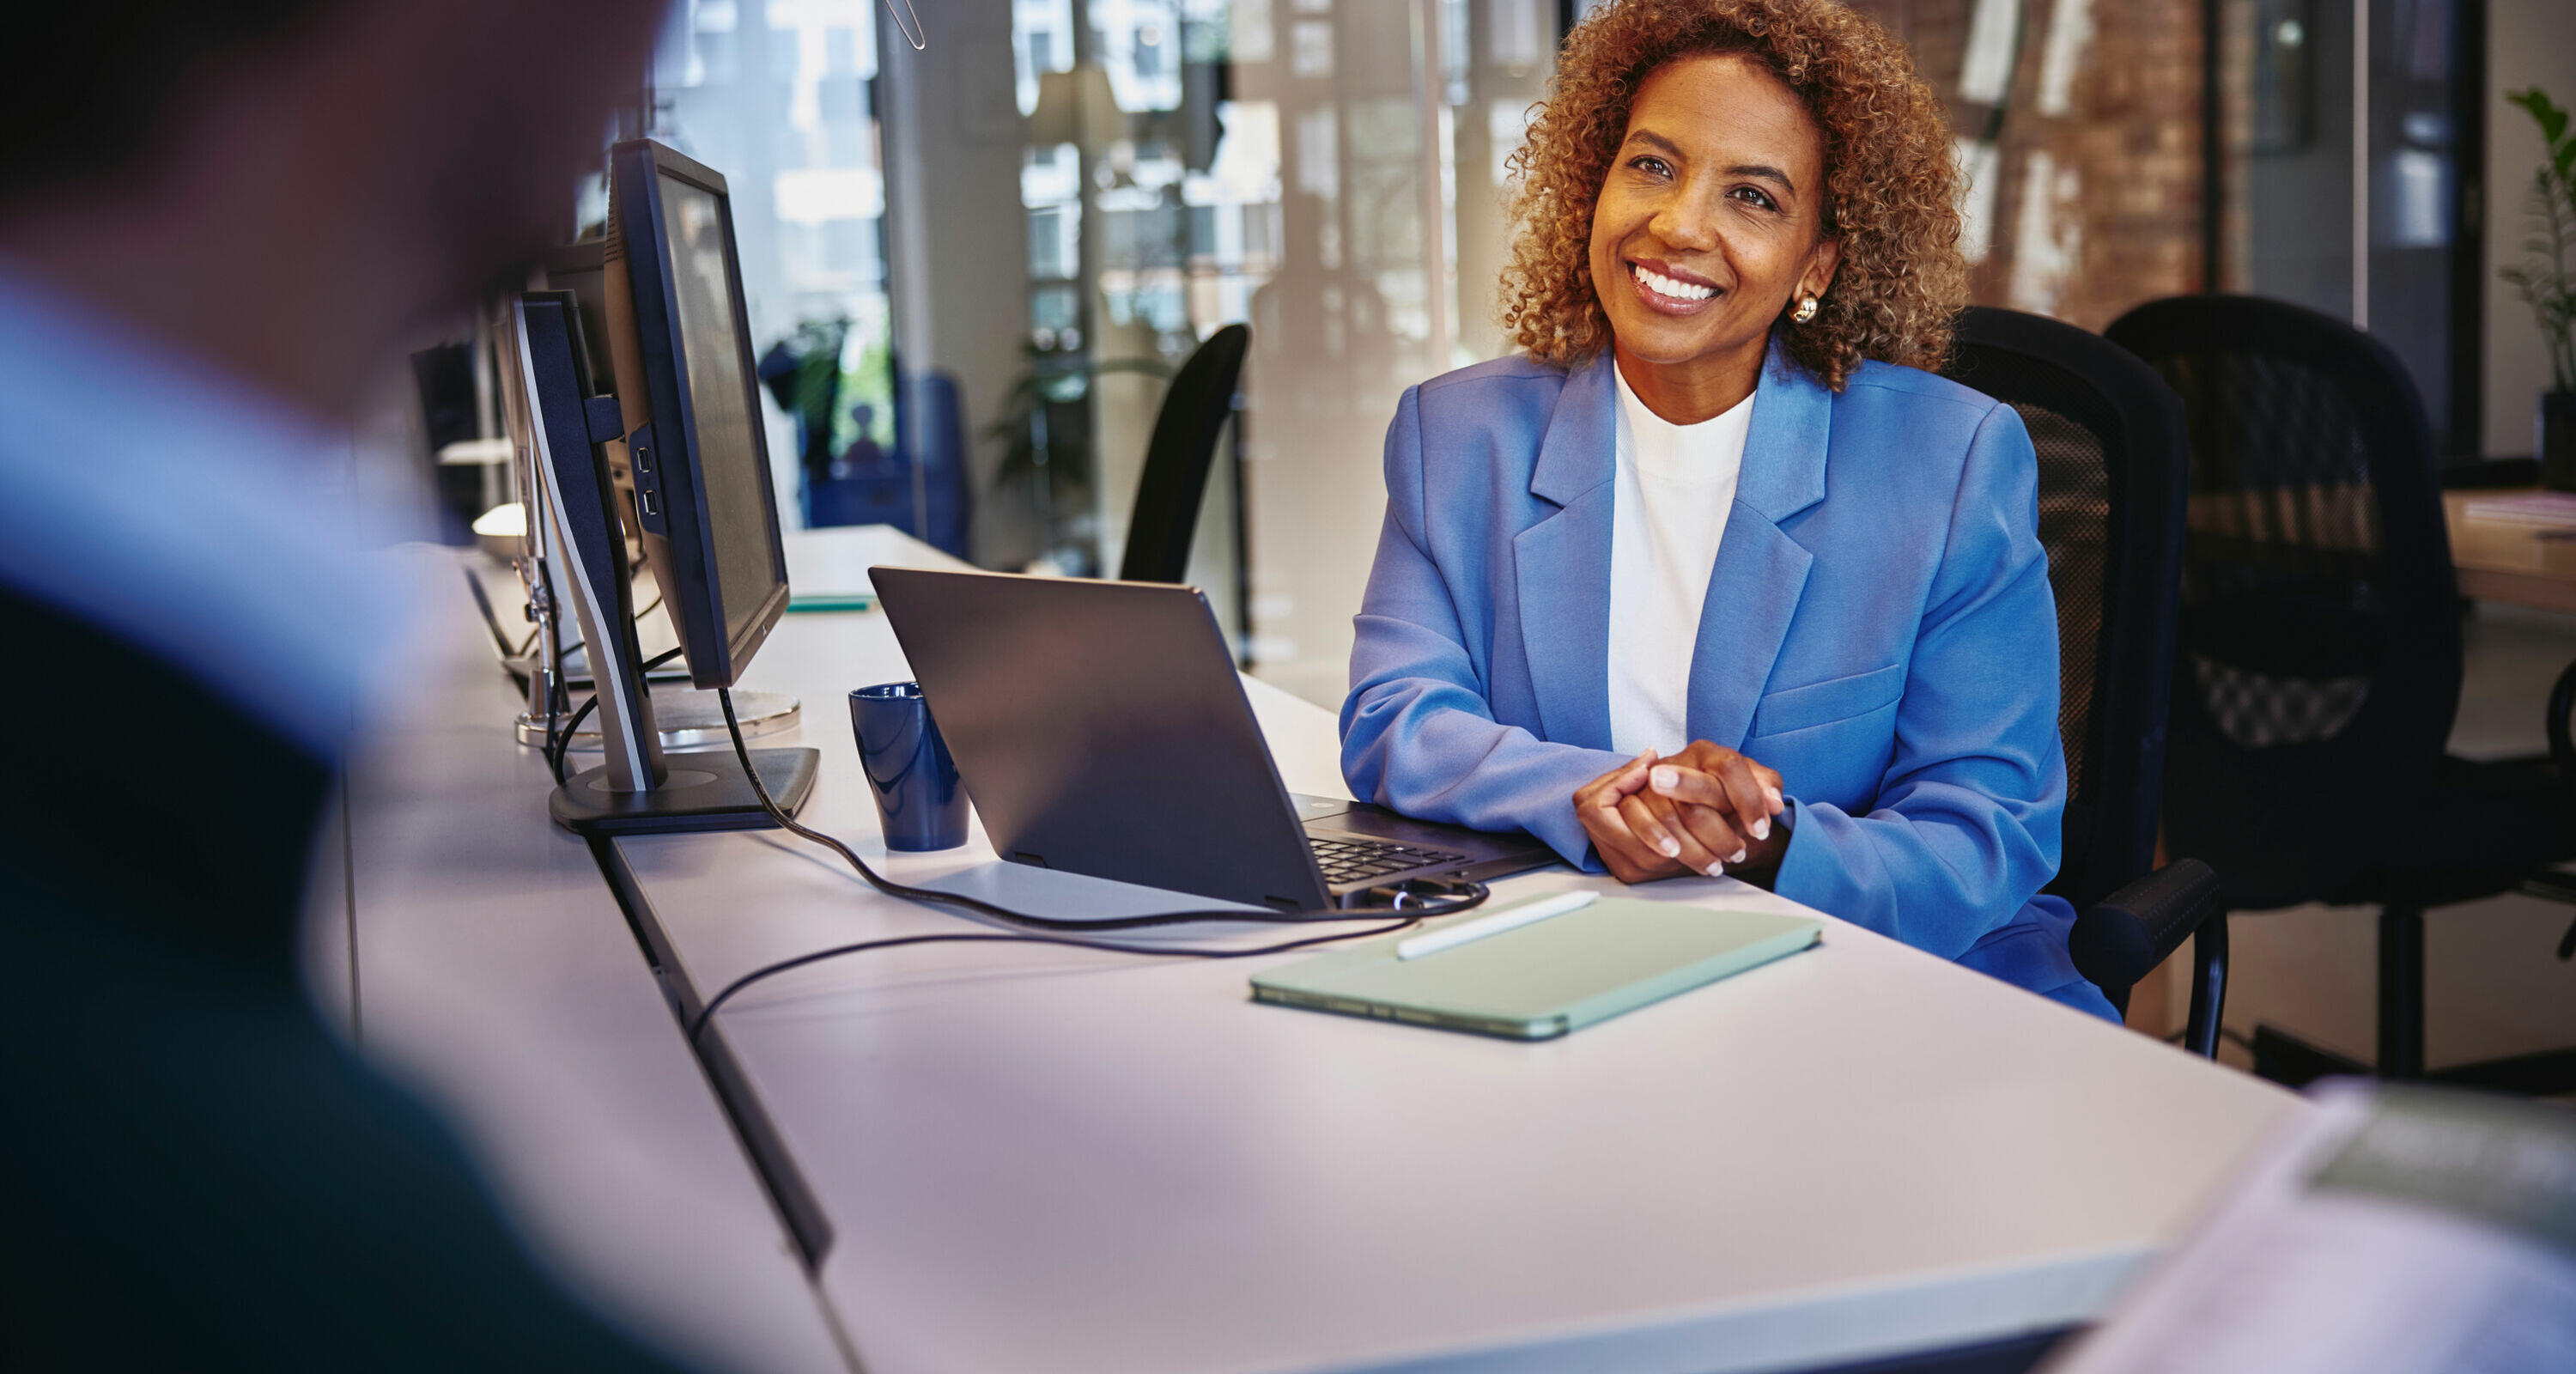 Female with blue blazer sitting behind computer at a desk, smiling to a person